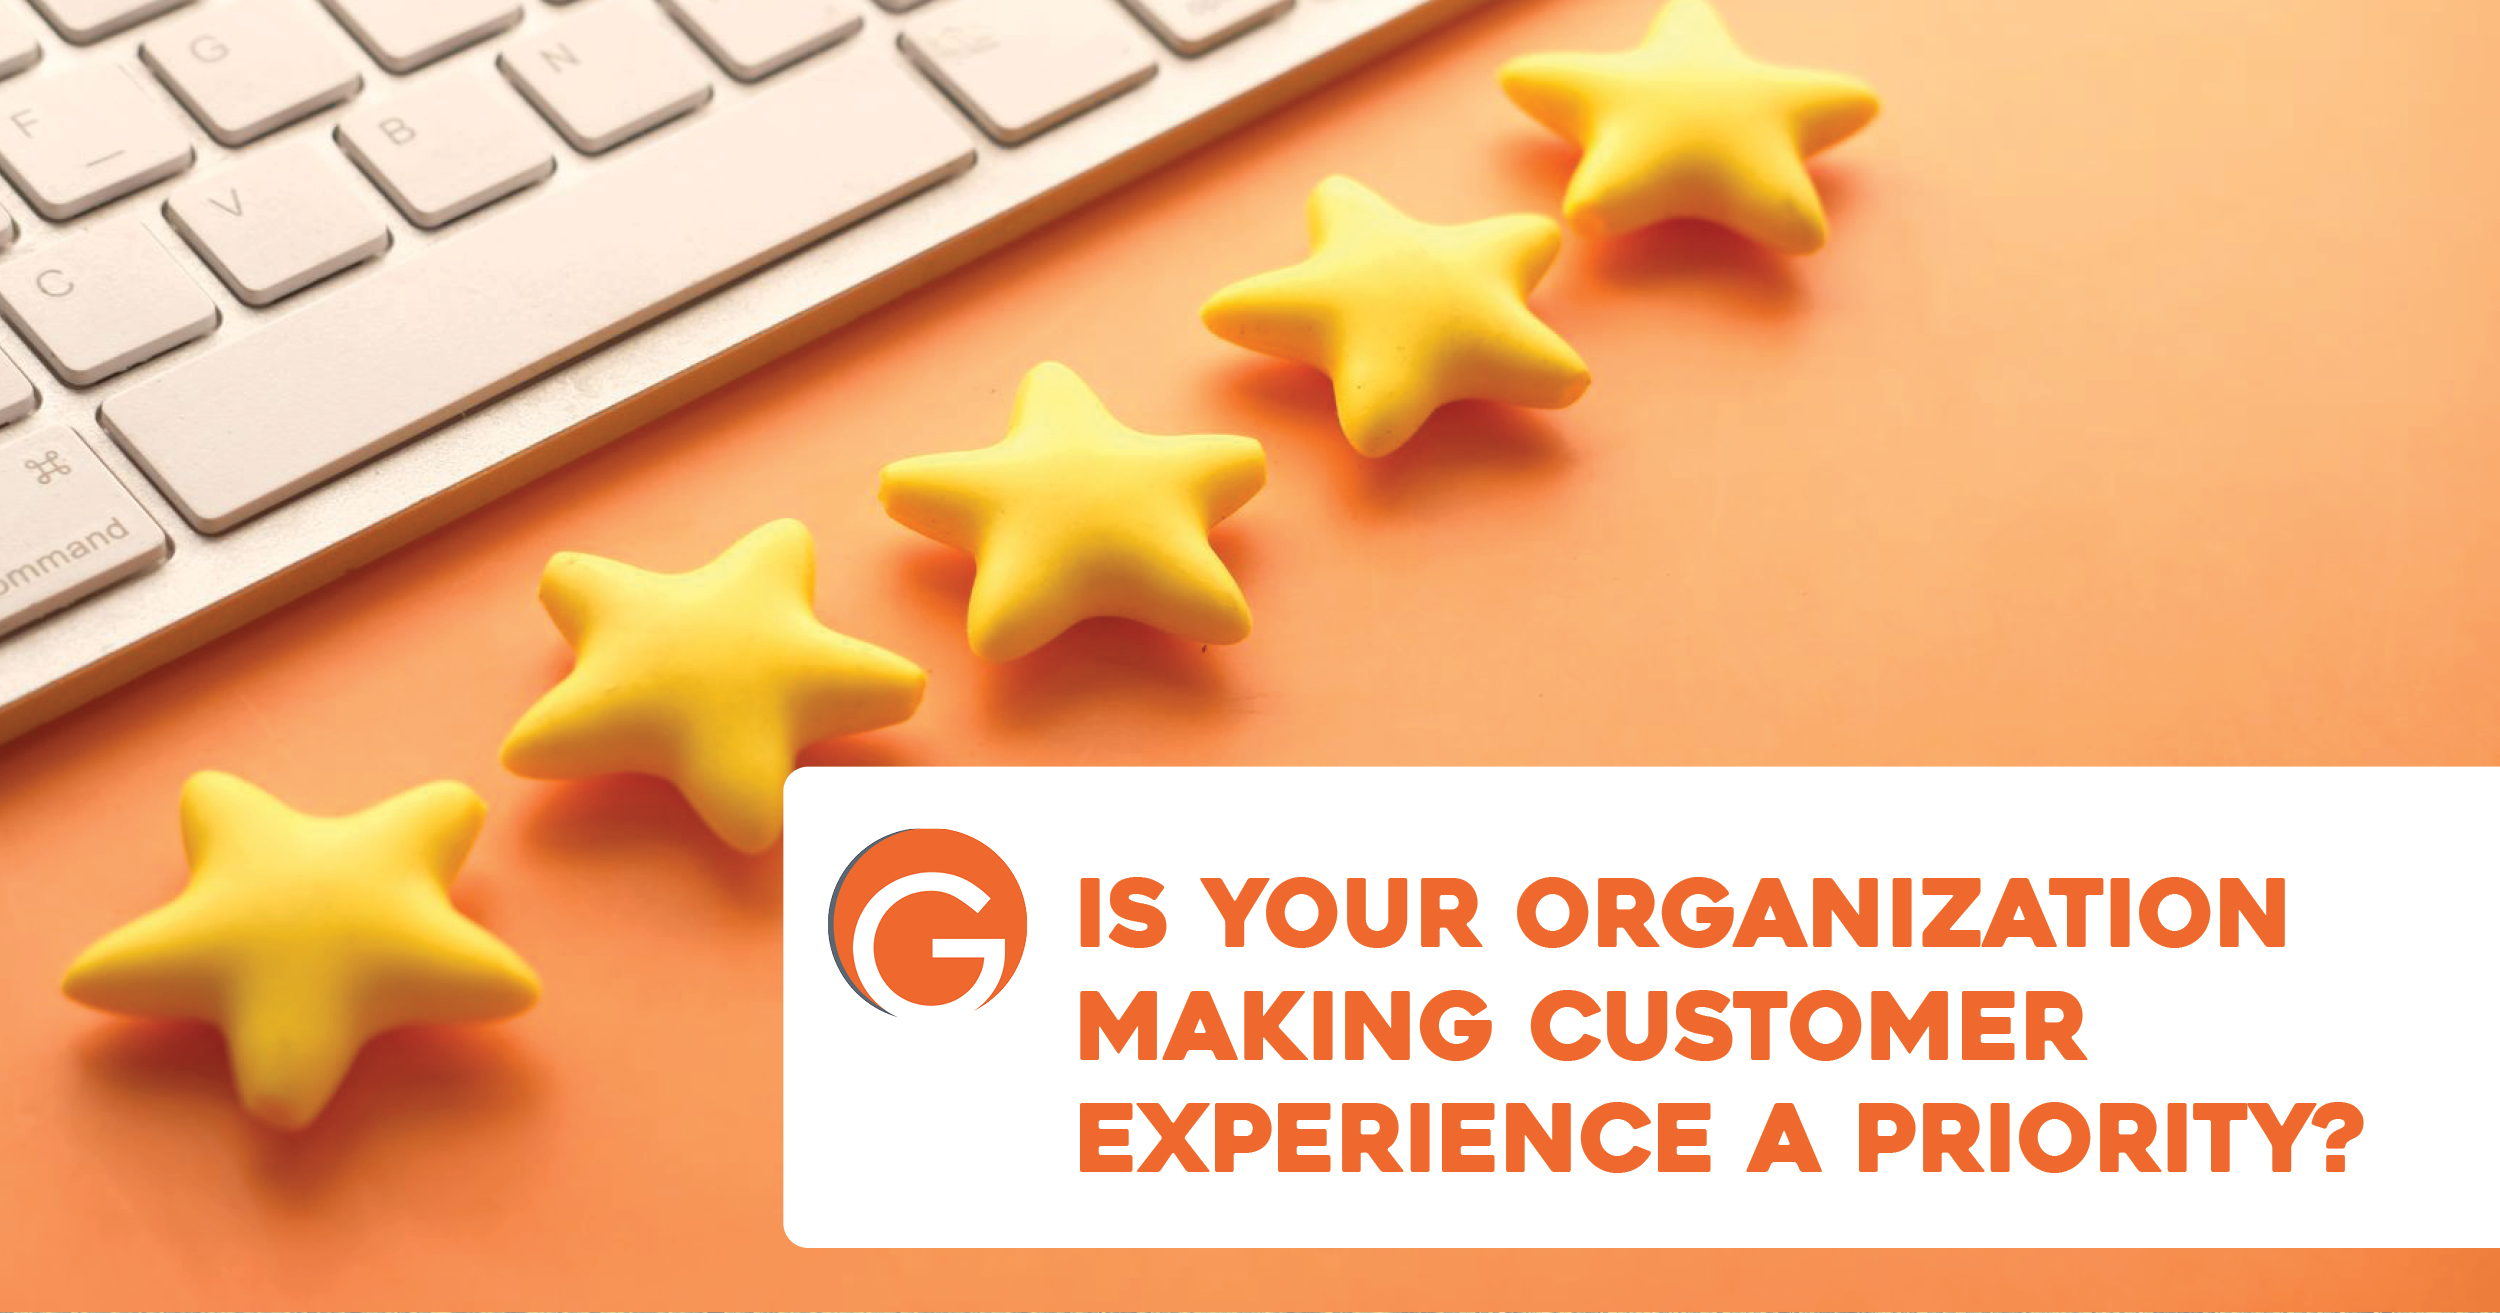 Is your organization making customer experience a priority?